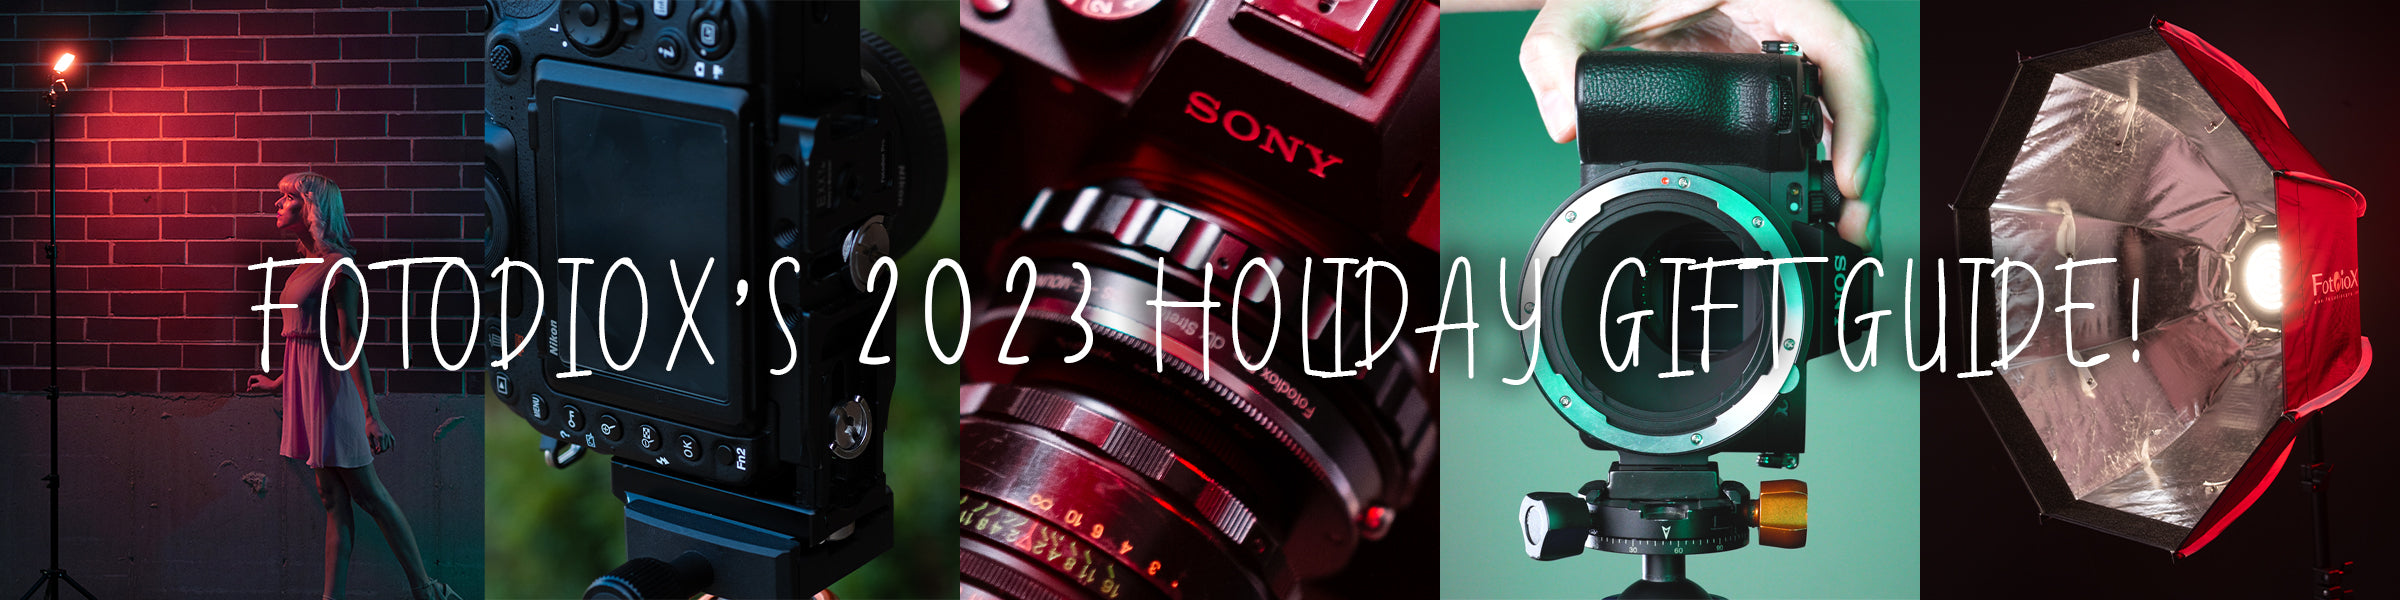 Fotodiox's 2023 Holiday Gift Guide!